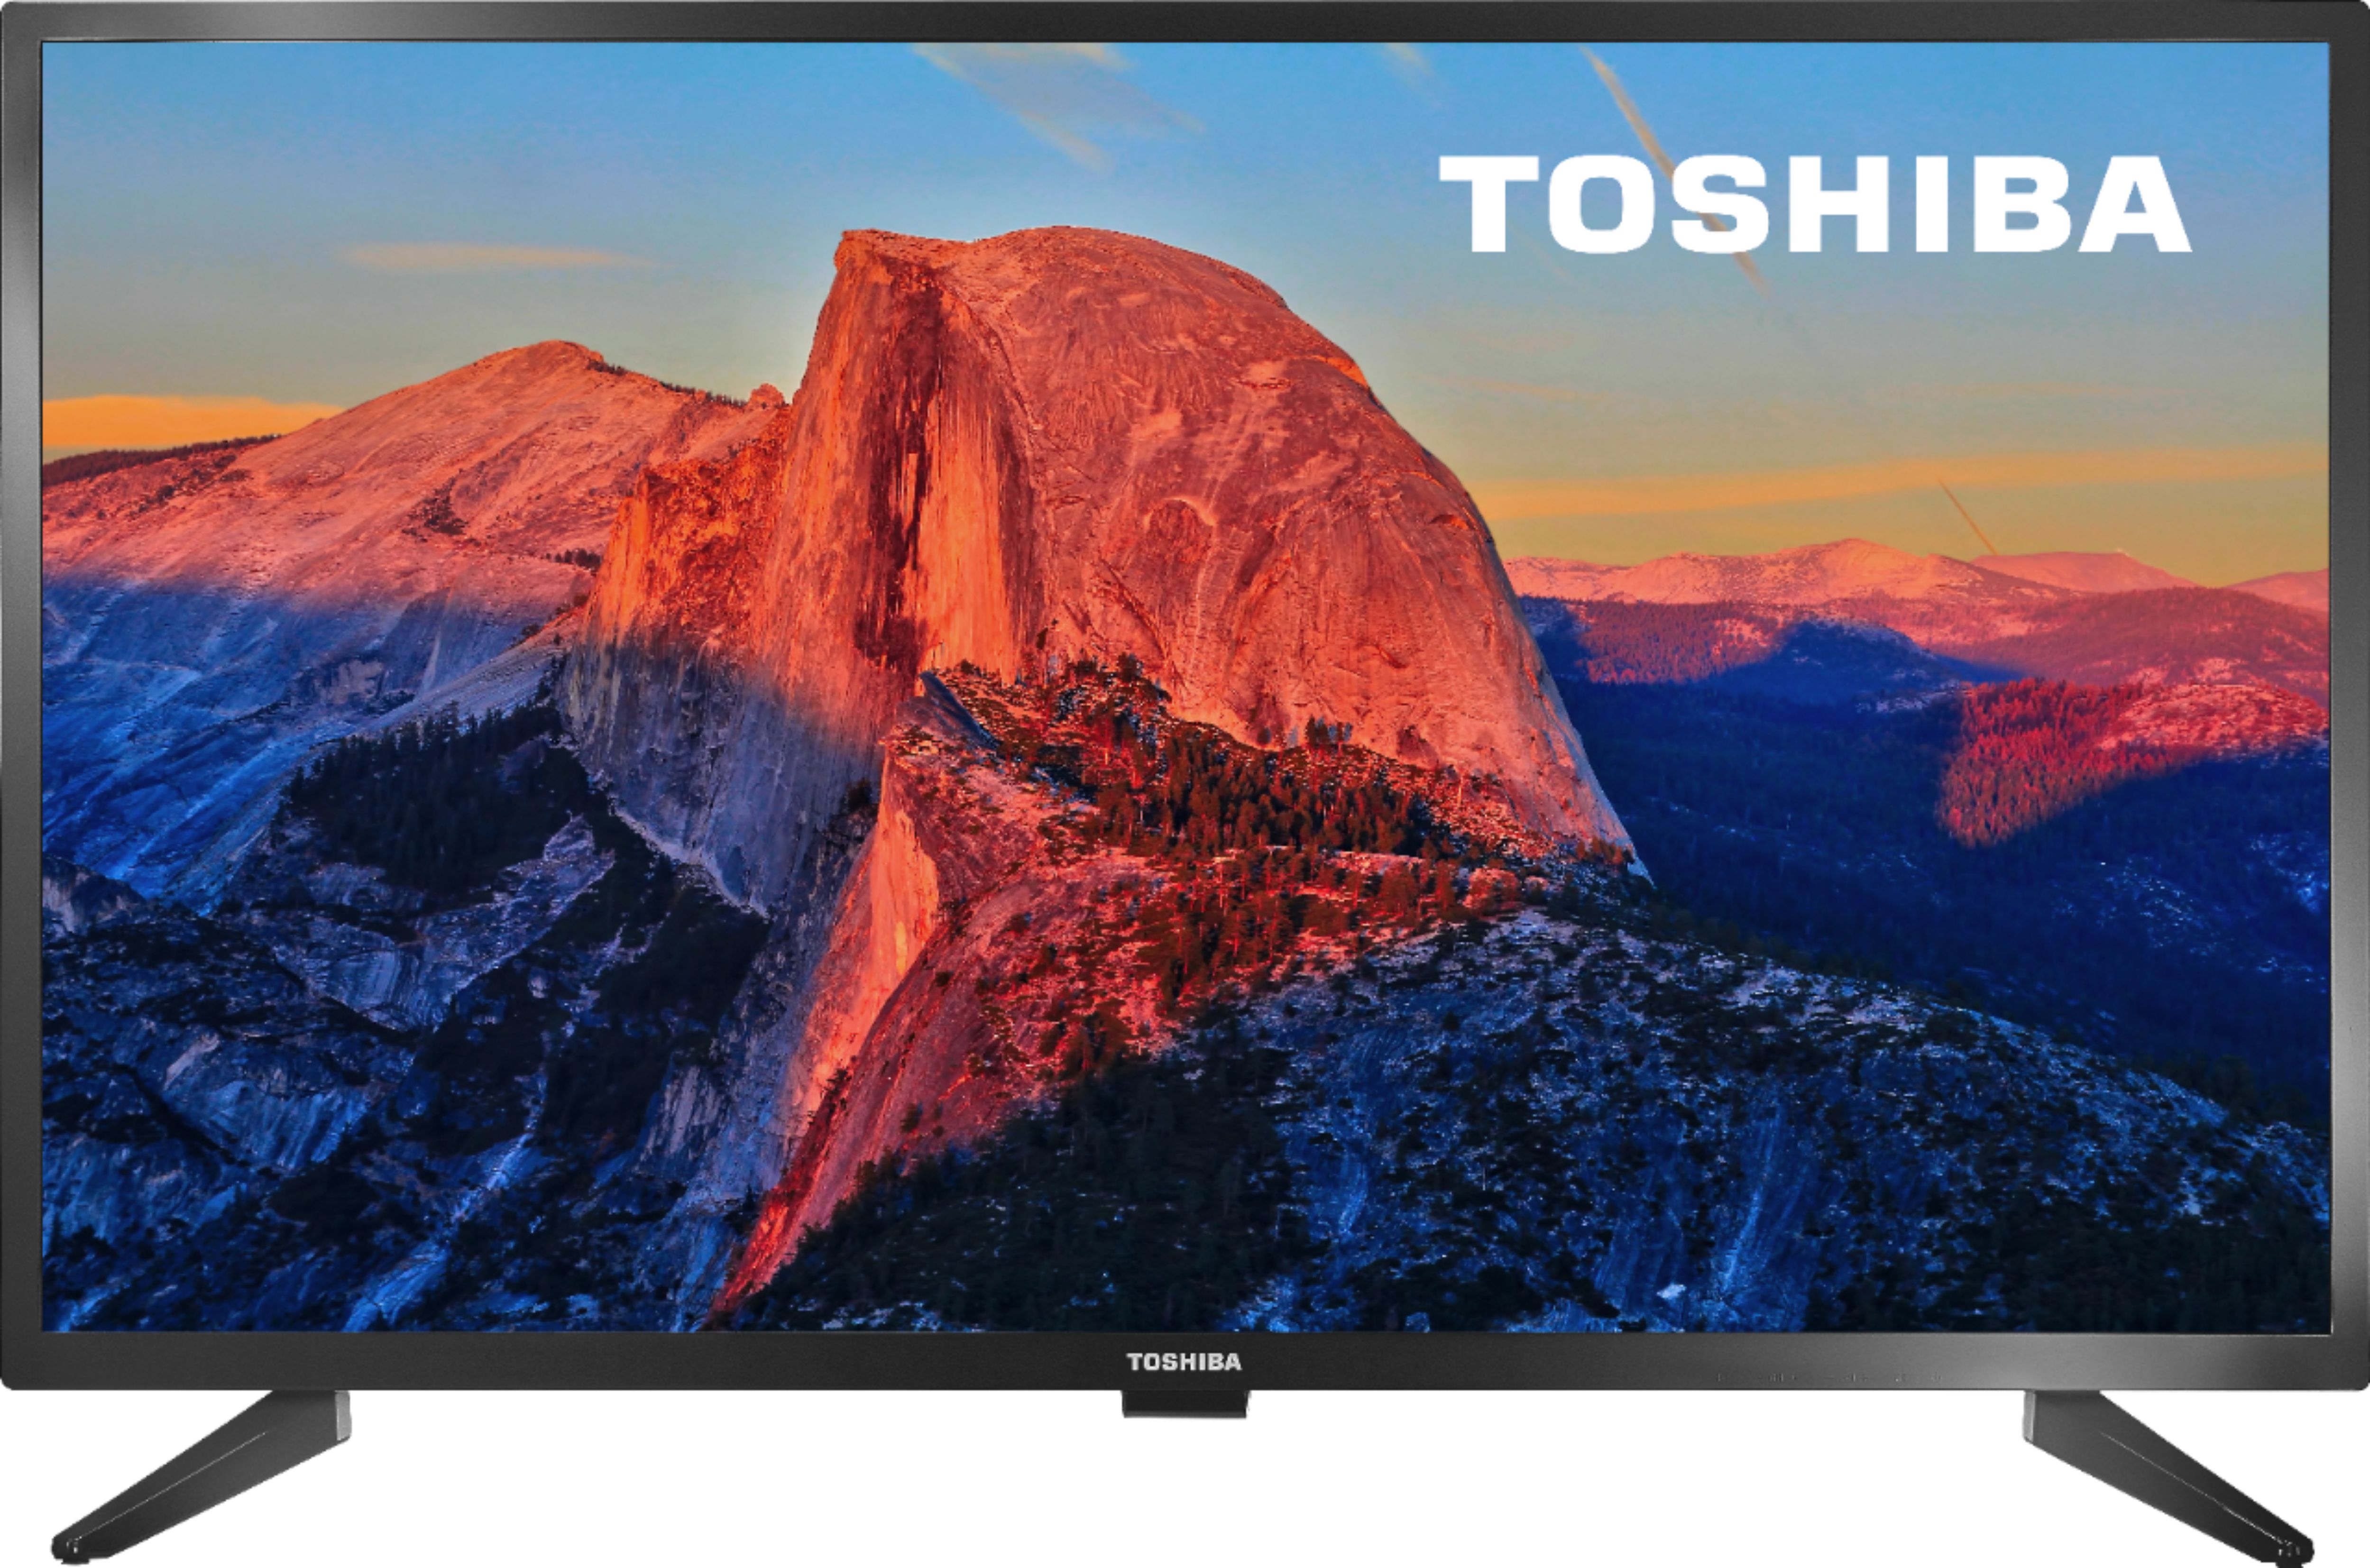 Complete analysis of the advantages of the Toshiba 32-inch TV